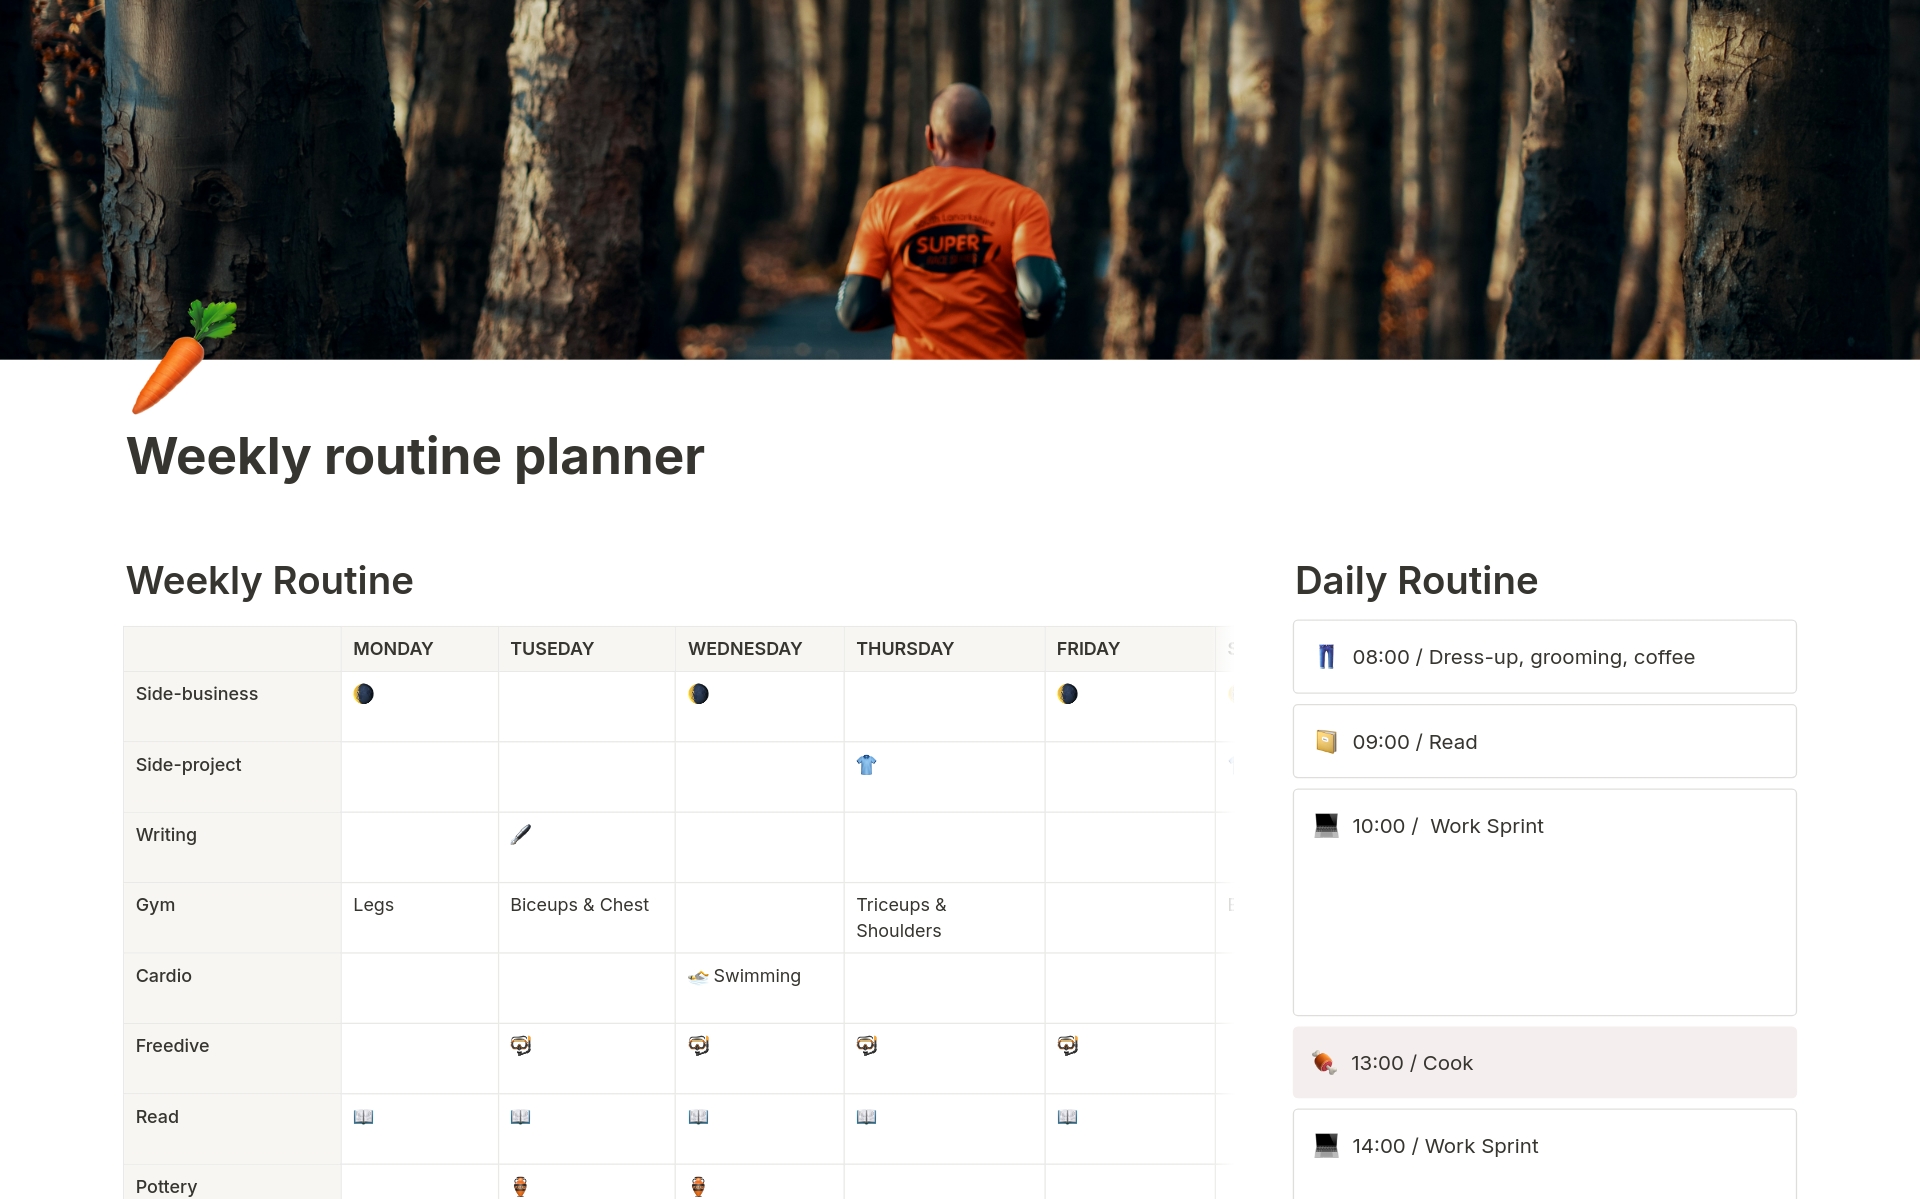 A weekly routine planner for scheduling habits and daily activities like gym, jogging, hobbies, and side projects